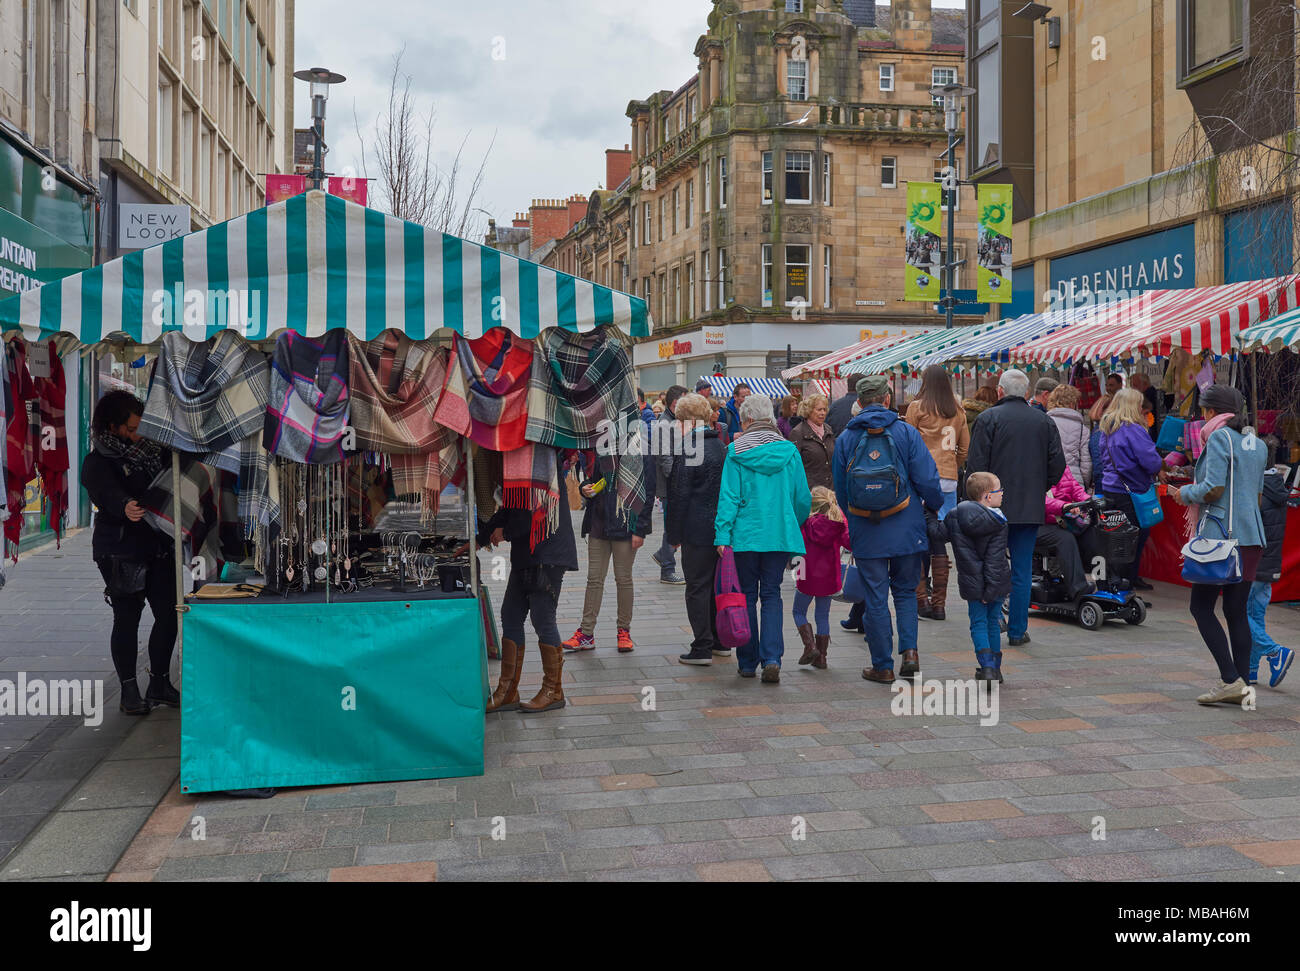 Looking up the High Street at the Shoppers enjoying the Perth Farmers Market which is held every other weekend in Springtime. Perthshire, Scotland. Stock Photo